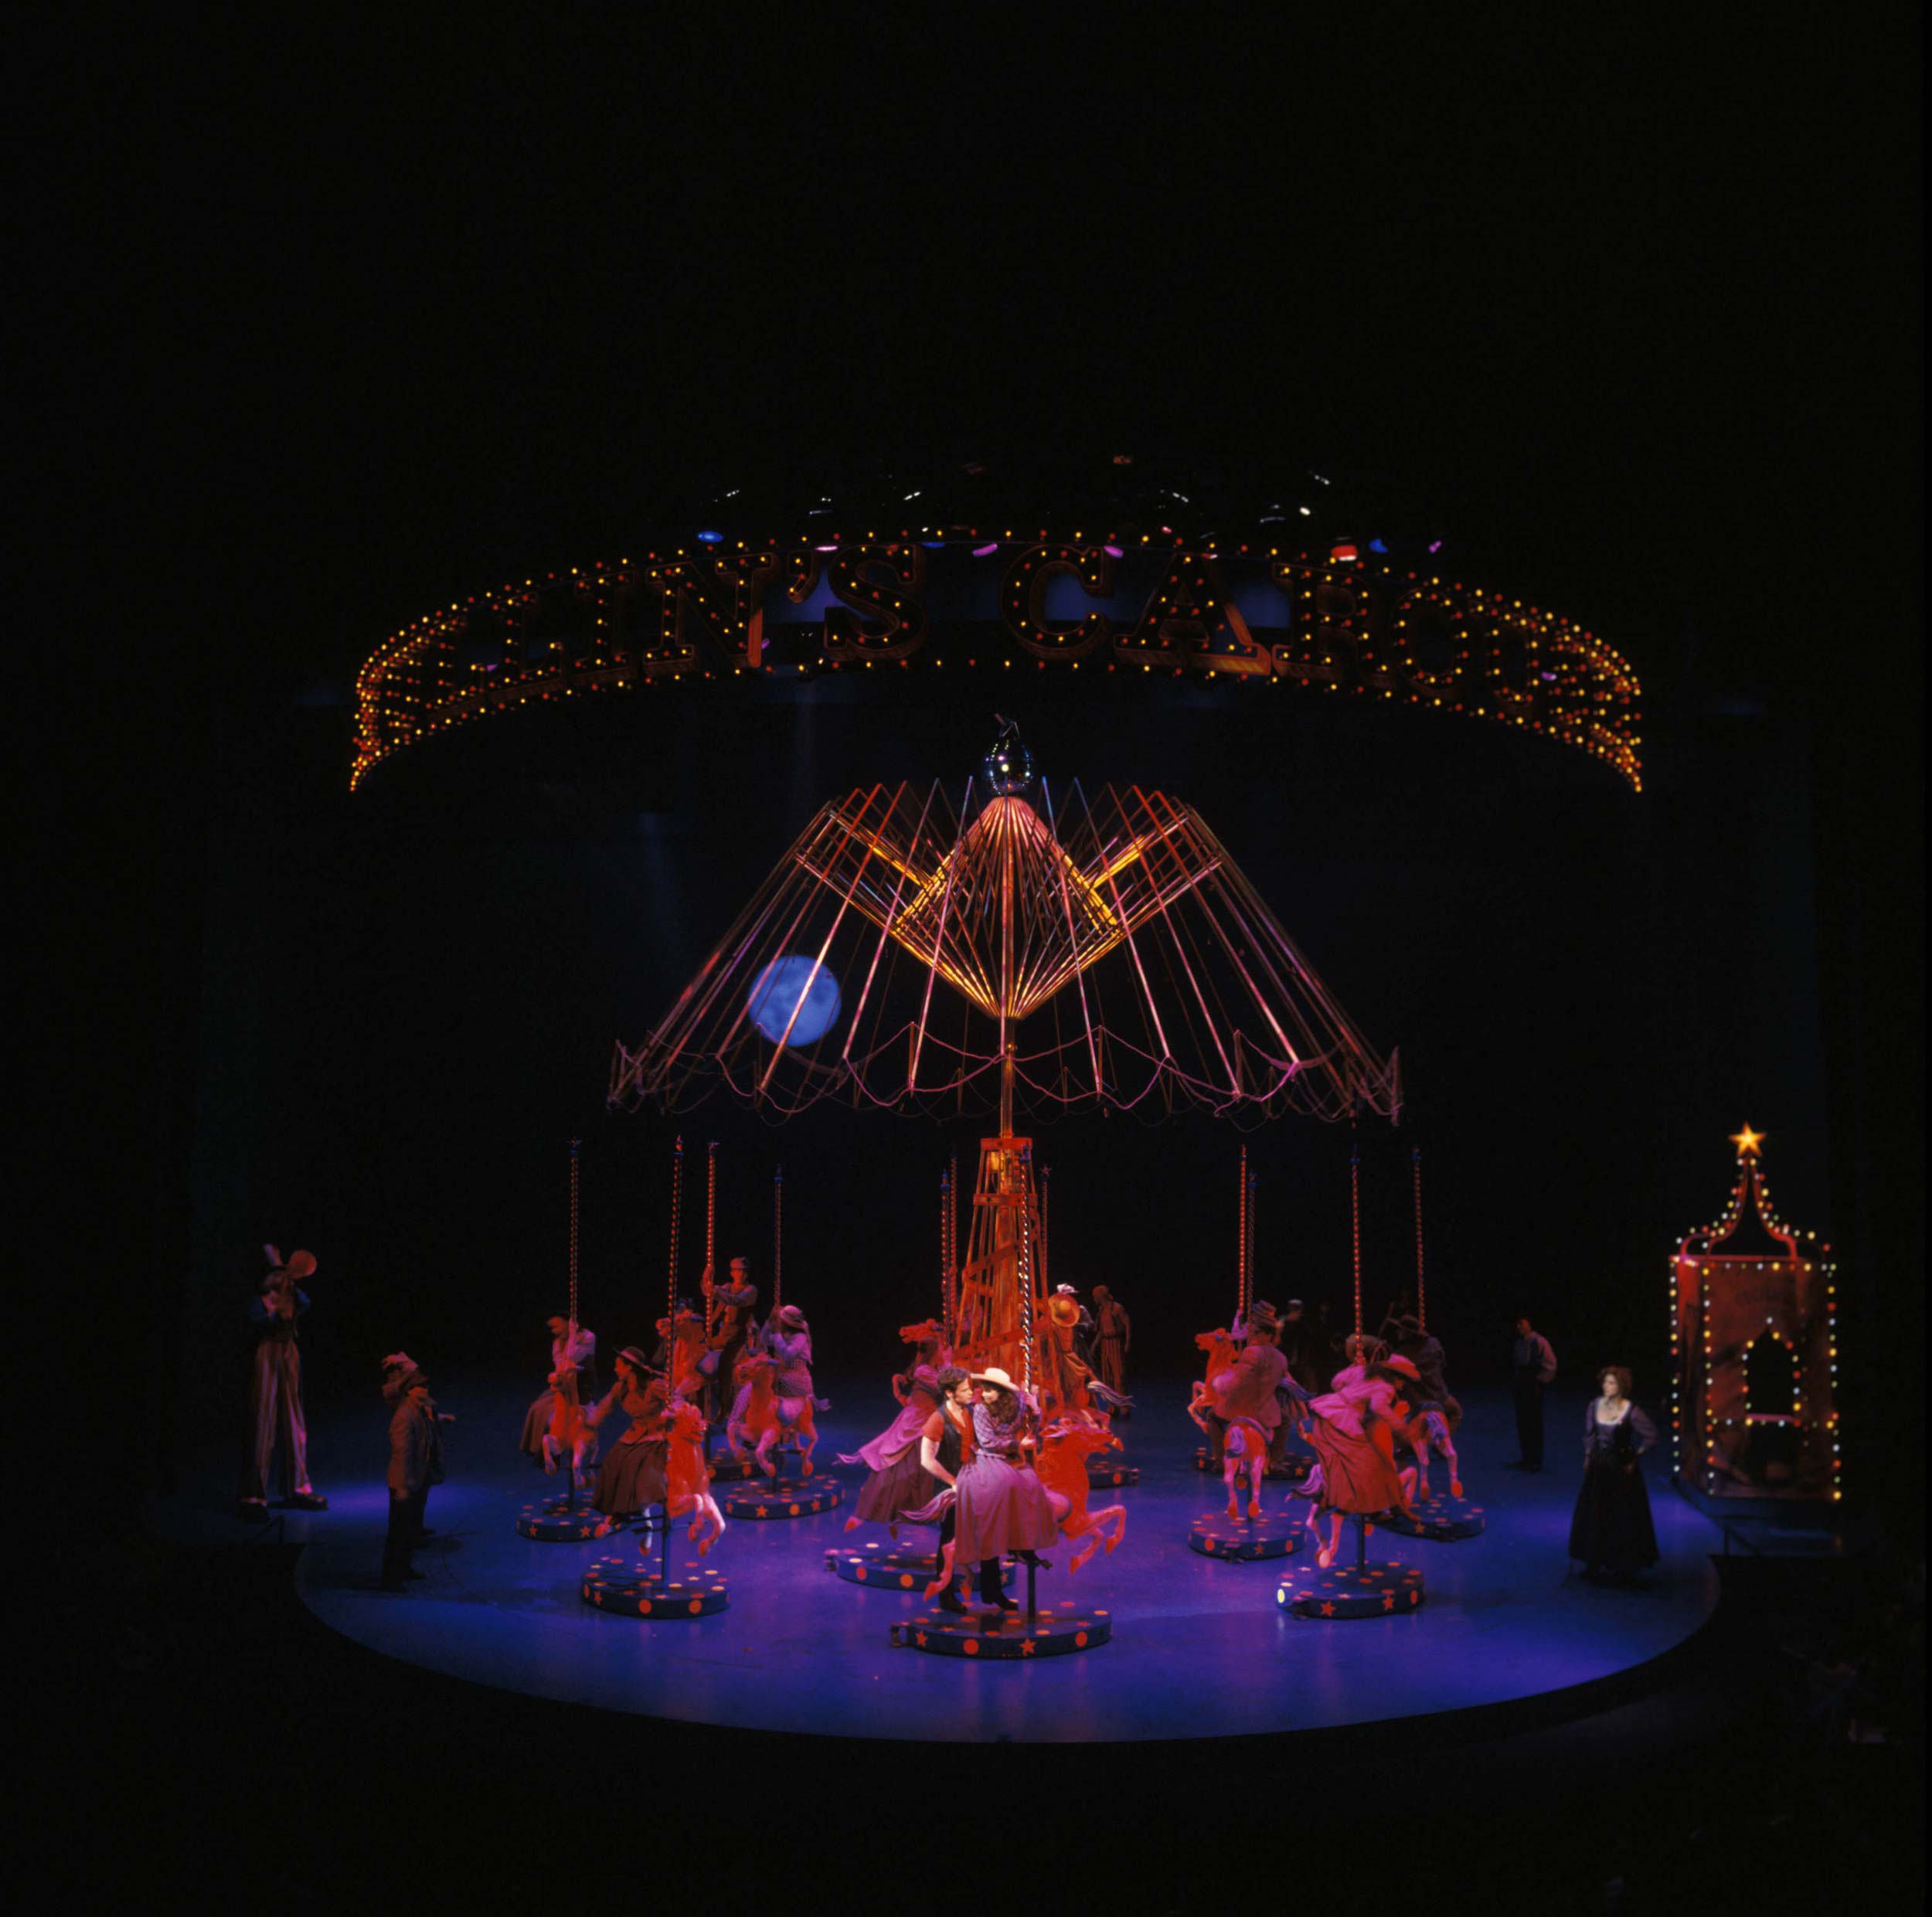 A photo from the 1994 Broadway production of Carousel.